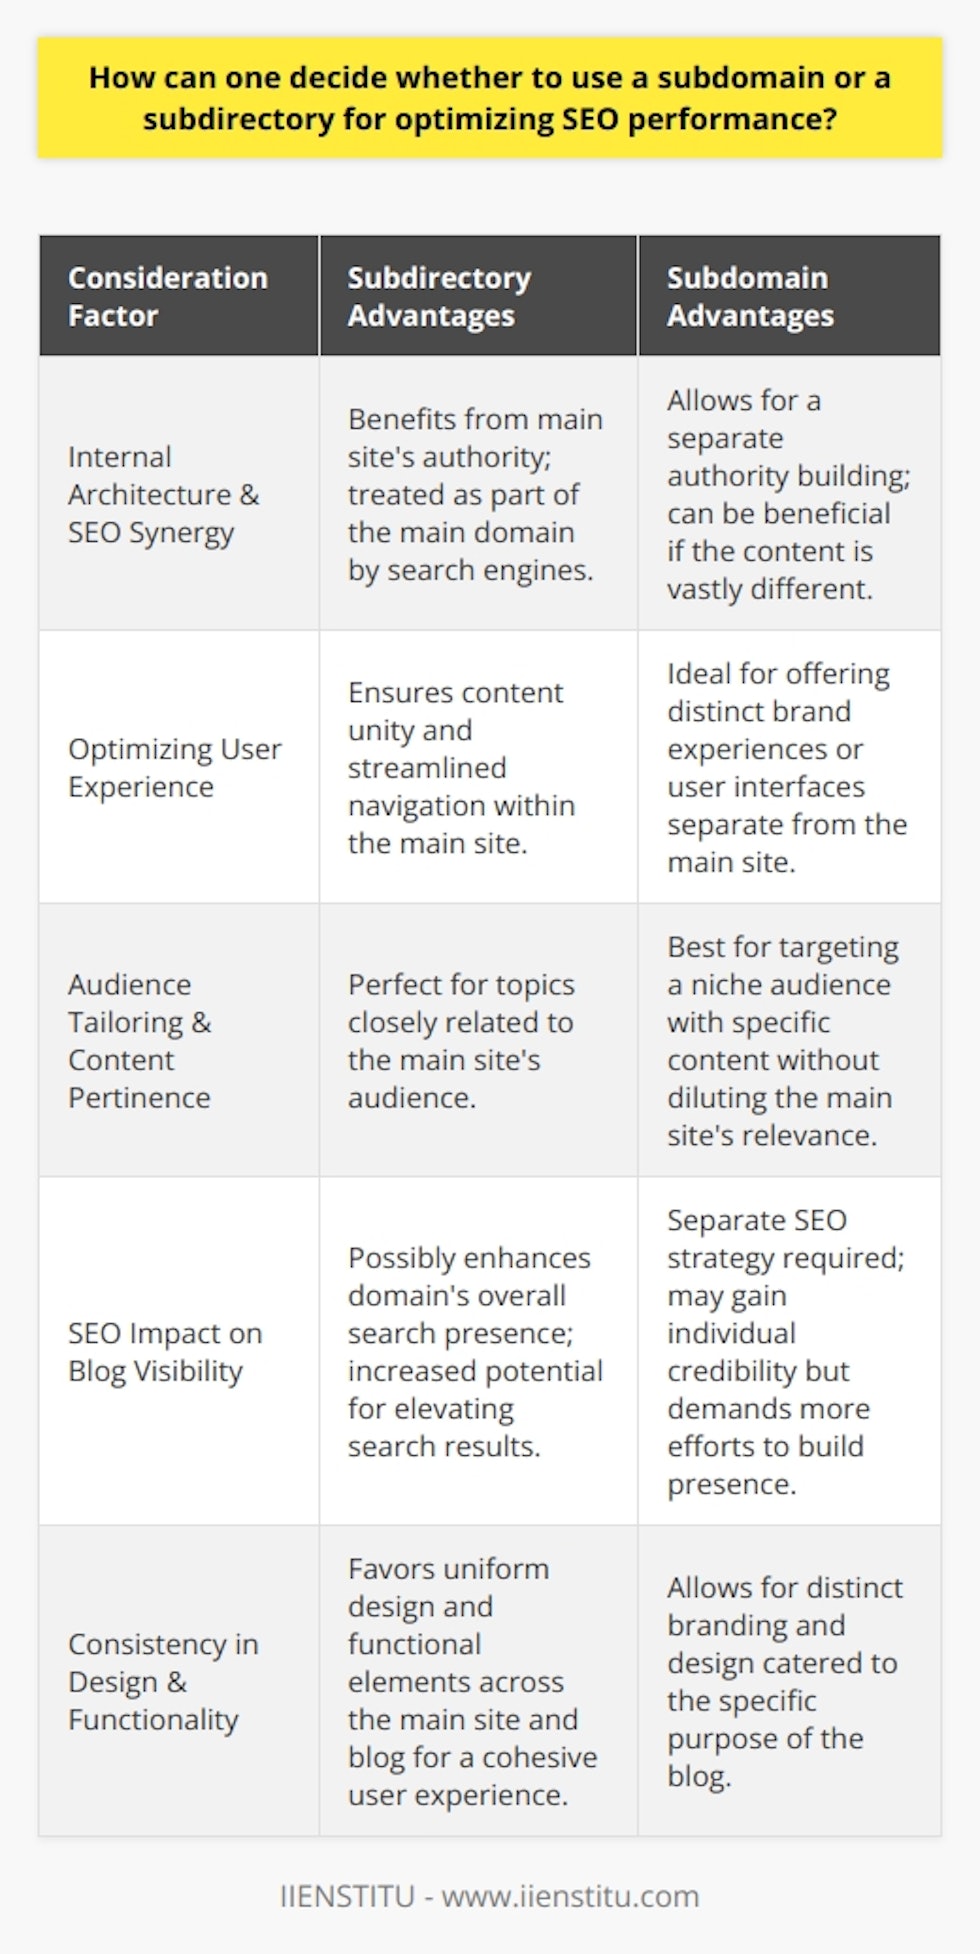 When deliberating between implementing a subdomain or a subdirectory to bolster SEO performance, one must weigh a set of tactical considerations. These aspects revolve around the structural intricacies of the website, the anticipated user interaction, and the specificities of the intended audience. A strategic approach to this decision can have a profound impact on the blog post's visibility and, by extension, on the website's overall search engine rankings.**Internal Architecture and SEO Synergy**The architecture of a website plays a pivotal role in its SEO success. If a blog's subject matter exhibits a strong connection with the main site's content, opting for a subdirectory would be advantageous. The rationale is straightforward: search engines like Google often treat subdirectories as a facet of the main domain, which enables the blog to benefit from the main site's SEO efforts and established authority. Thus, the blog's presence in a subdirectory can positively affect the domain's search presence, potentially elevating it in the search results.**Optimizing User Experience**An exceptional user experience is essential for visitor retention and to signal to search engines that the website is of high quality. When continuity and a streamlined user interface are pivotal, housing a blog in a subdirectory can provide that. Such an arrangement suggests content unity and is likely to facilitate user navigation. It also helps maintain design and functional consistency across the main website and the blog. Conversely, should the blog cater to a distinct purpose or present a different brand narrative, assigning it to a subdomain can prevent disruption of the primary site's thematic flow and user experience.**Audience Tailoring and Content Pertinence**A key to effective SEO is ensuring that content satisfies the interests and needs of the intended audience. When a blog is engineered to captivate a niche or divergent audience with unique preferences or informational demands, a subdomain can serve as a dedicated space. This separation allows for the cultivation of a specialized community or marketplace, with the subdomain potentially developing its own credibility and domain authority. Furthermore, a subdomain might prove beneficial for hosting content that is disparate from the main site's core themes, mitigating any potential dilution of subject relevance on the main domain.**Conclusion**In summary, discerning whether a subdomain or a subdirectory is more appropriate for SEO optimization of a blog hinges on a thorough analysis of the website’s structure, user experience considerations, and audience targeting. A deliberate assessment of these dimensions will guide the choice that best complements the website's long-range objectives, augmenting the user journey and fortifying SEO positioning. Engaging in such a meticulous examination and strategic deployment can pay dividends in enhancing a site’s visibility and, ultimately, its online success.